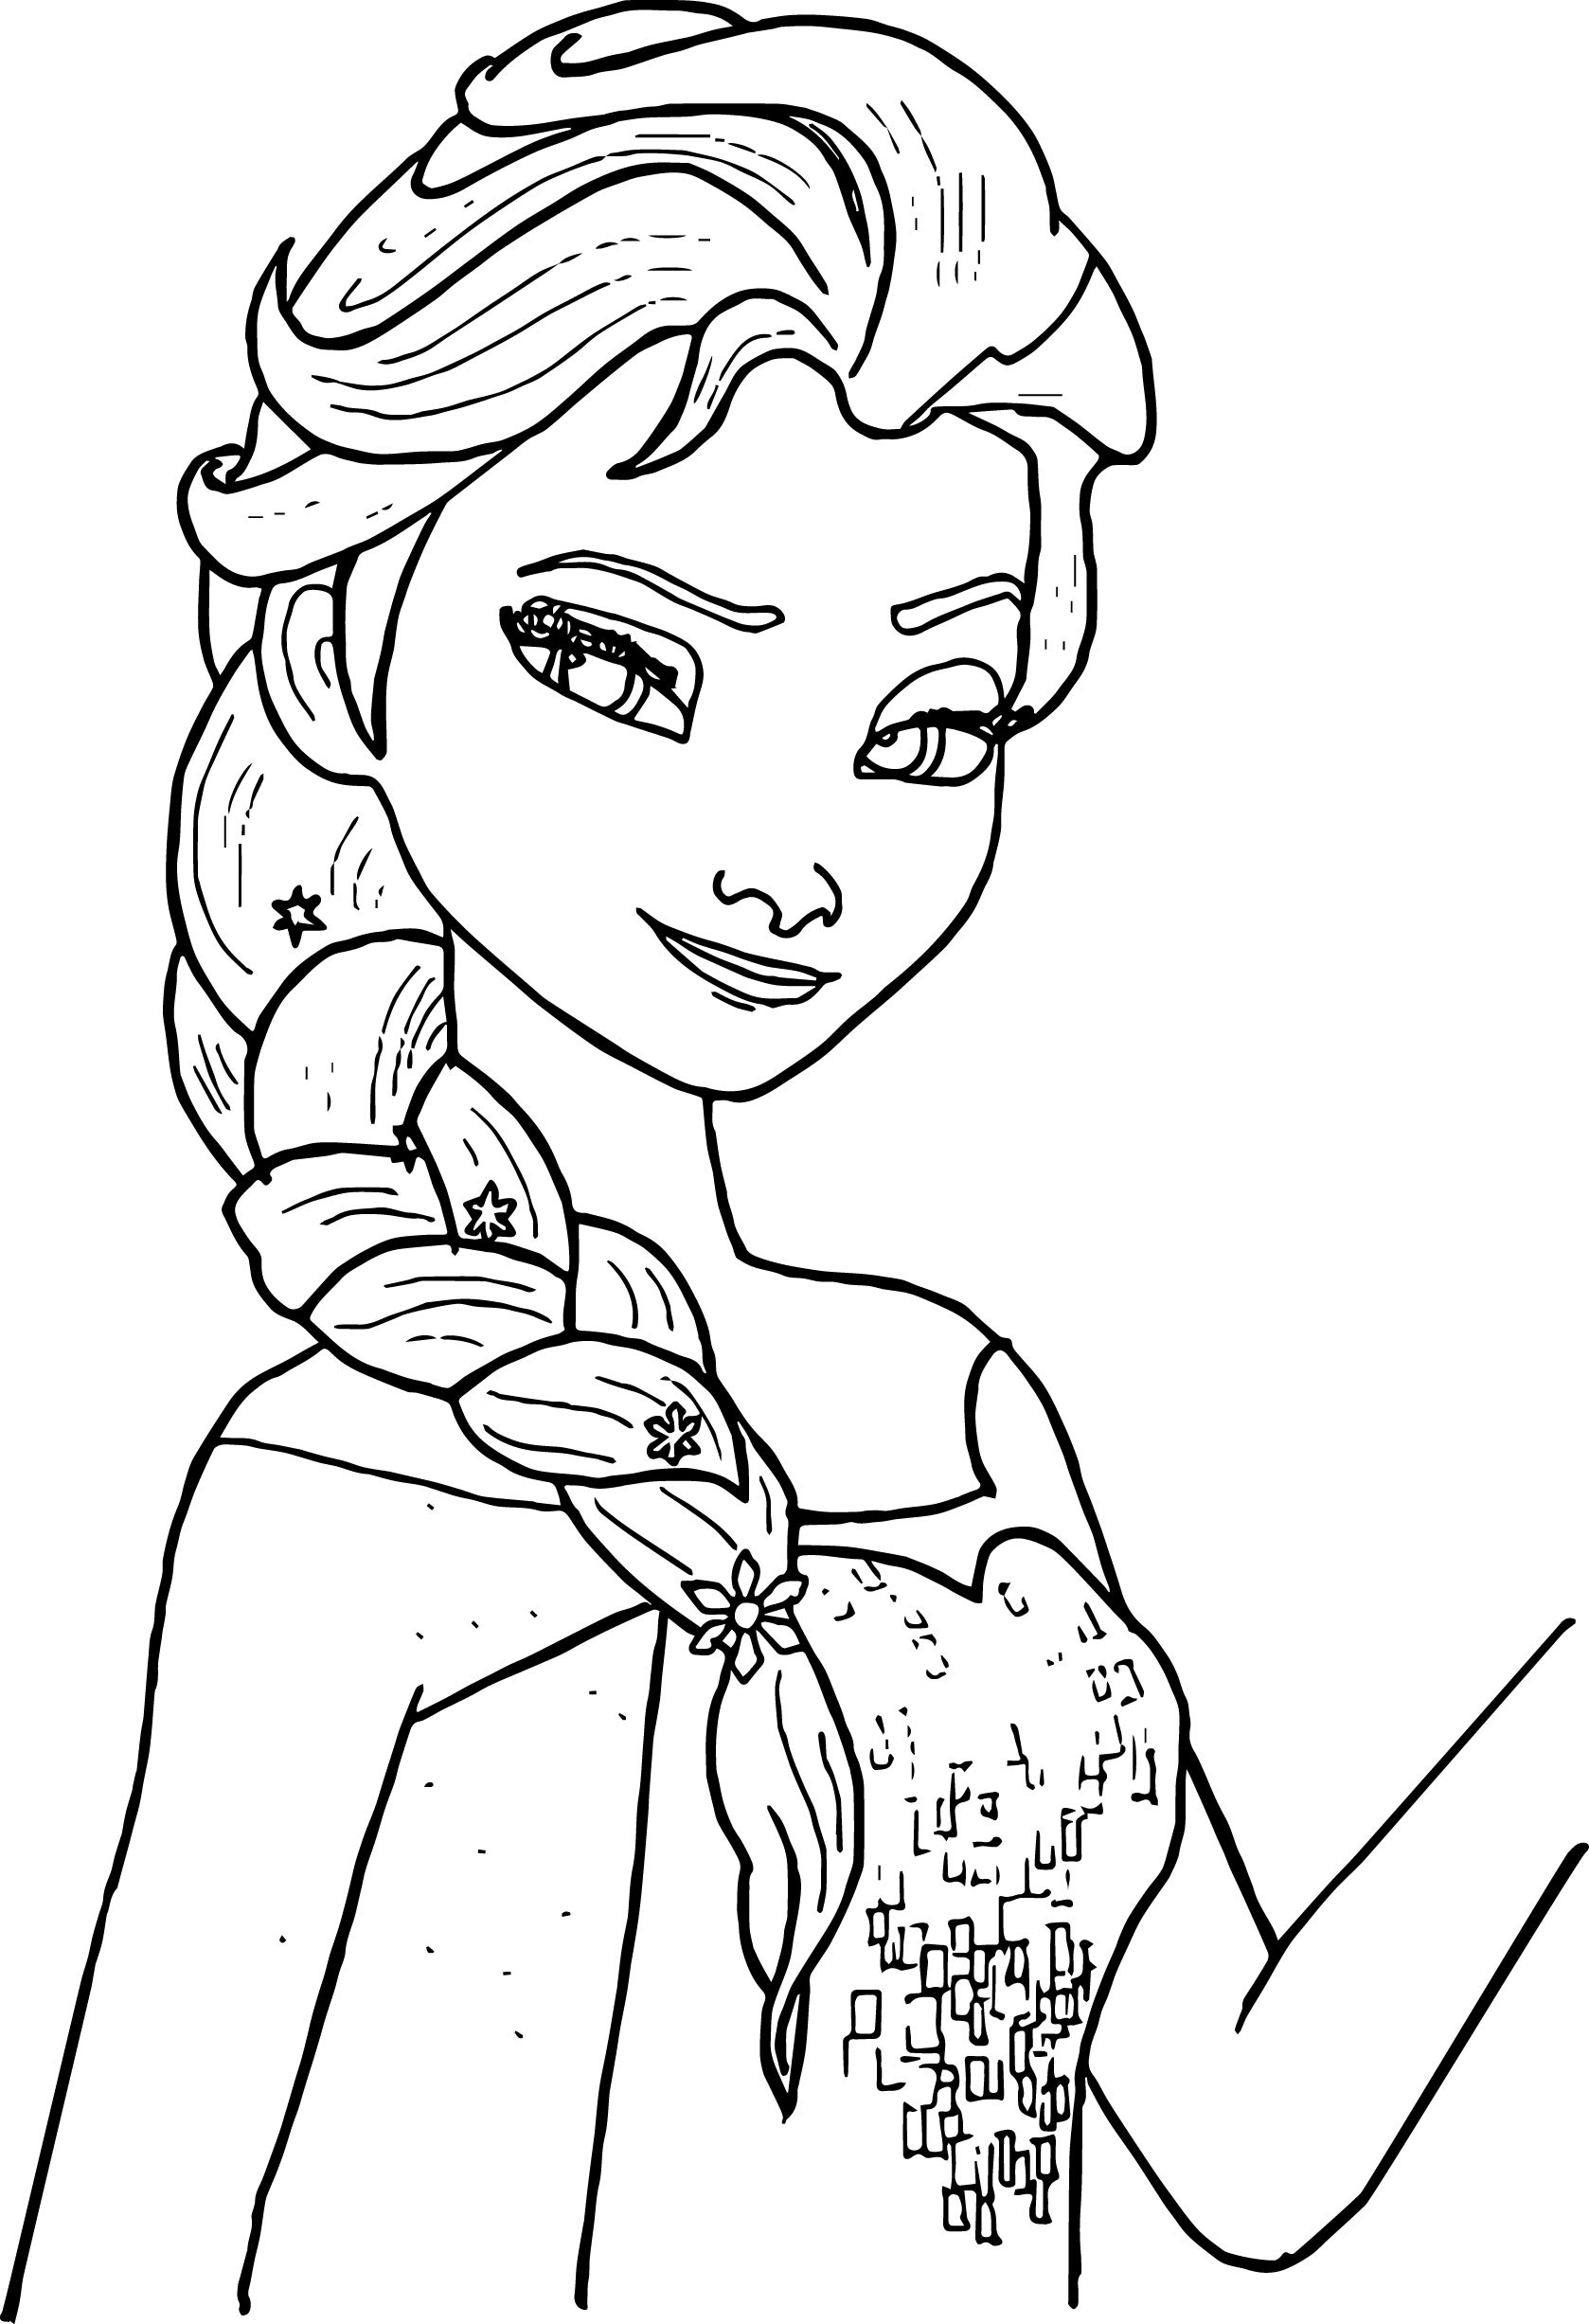 Coloring Pages For Kids Frozen
 Free Printable Elsa Coloring Pages for Kids Best